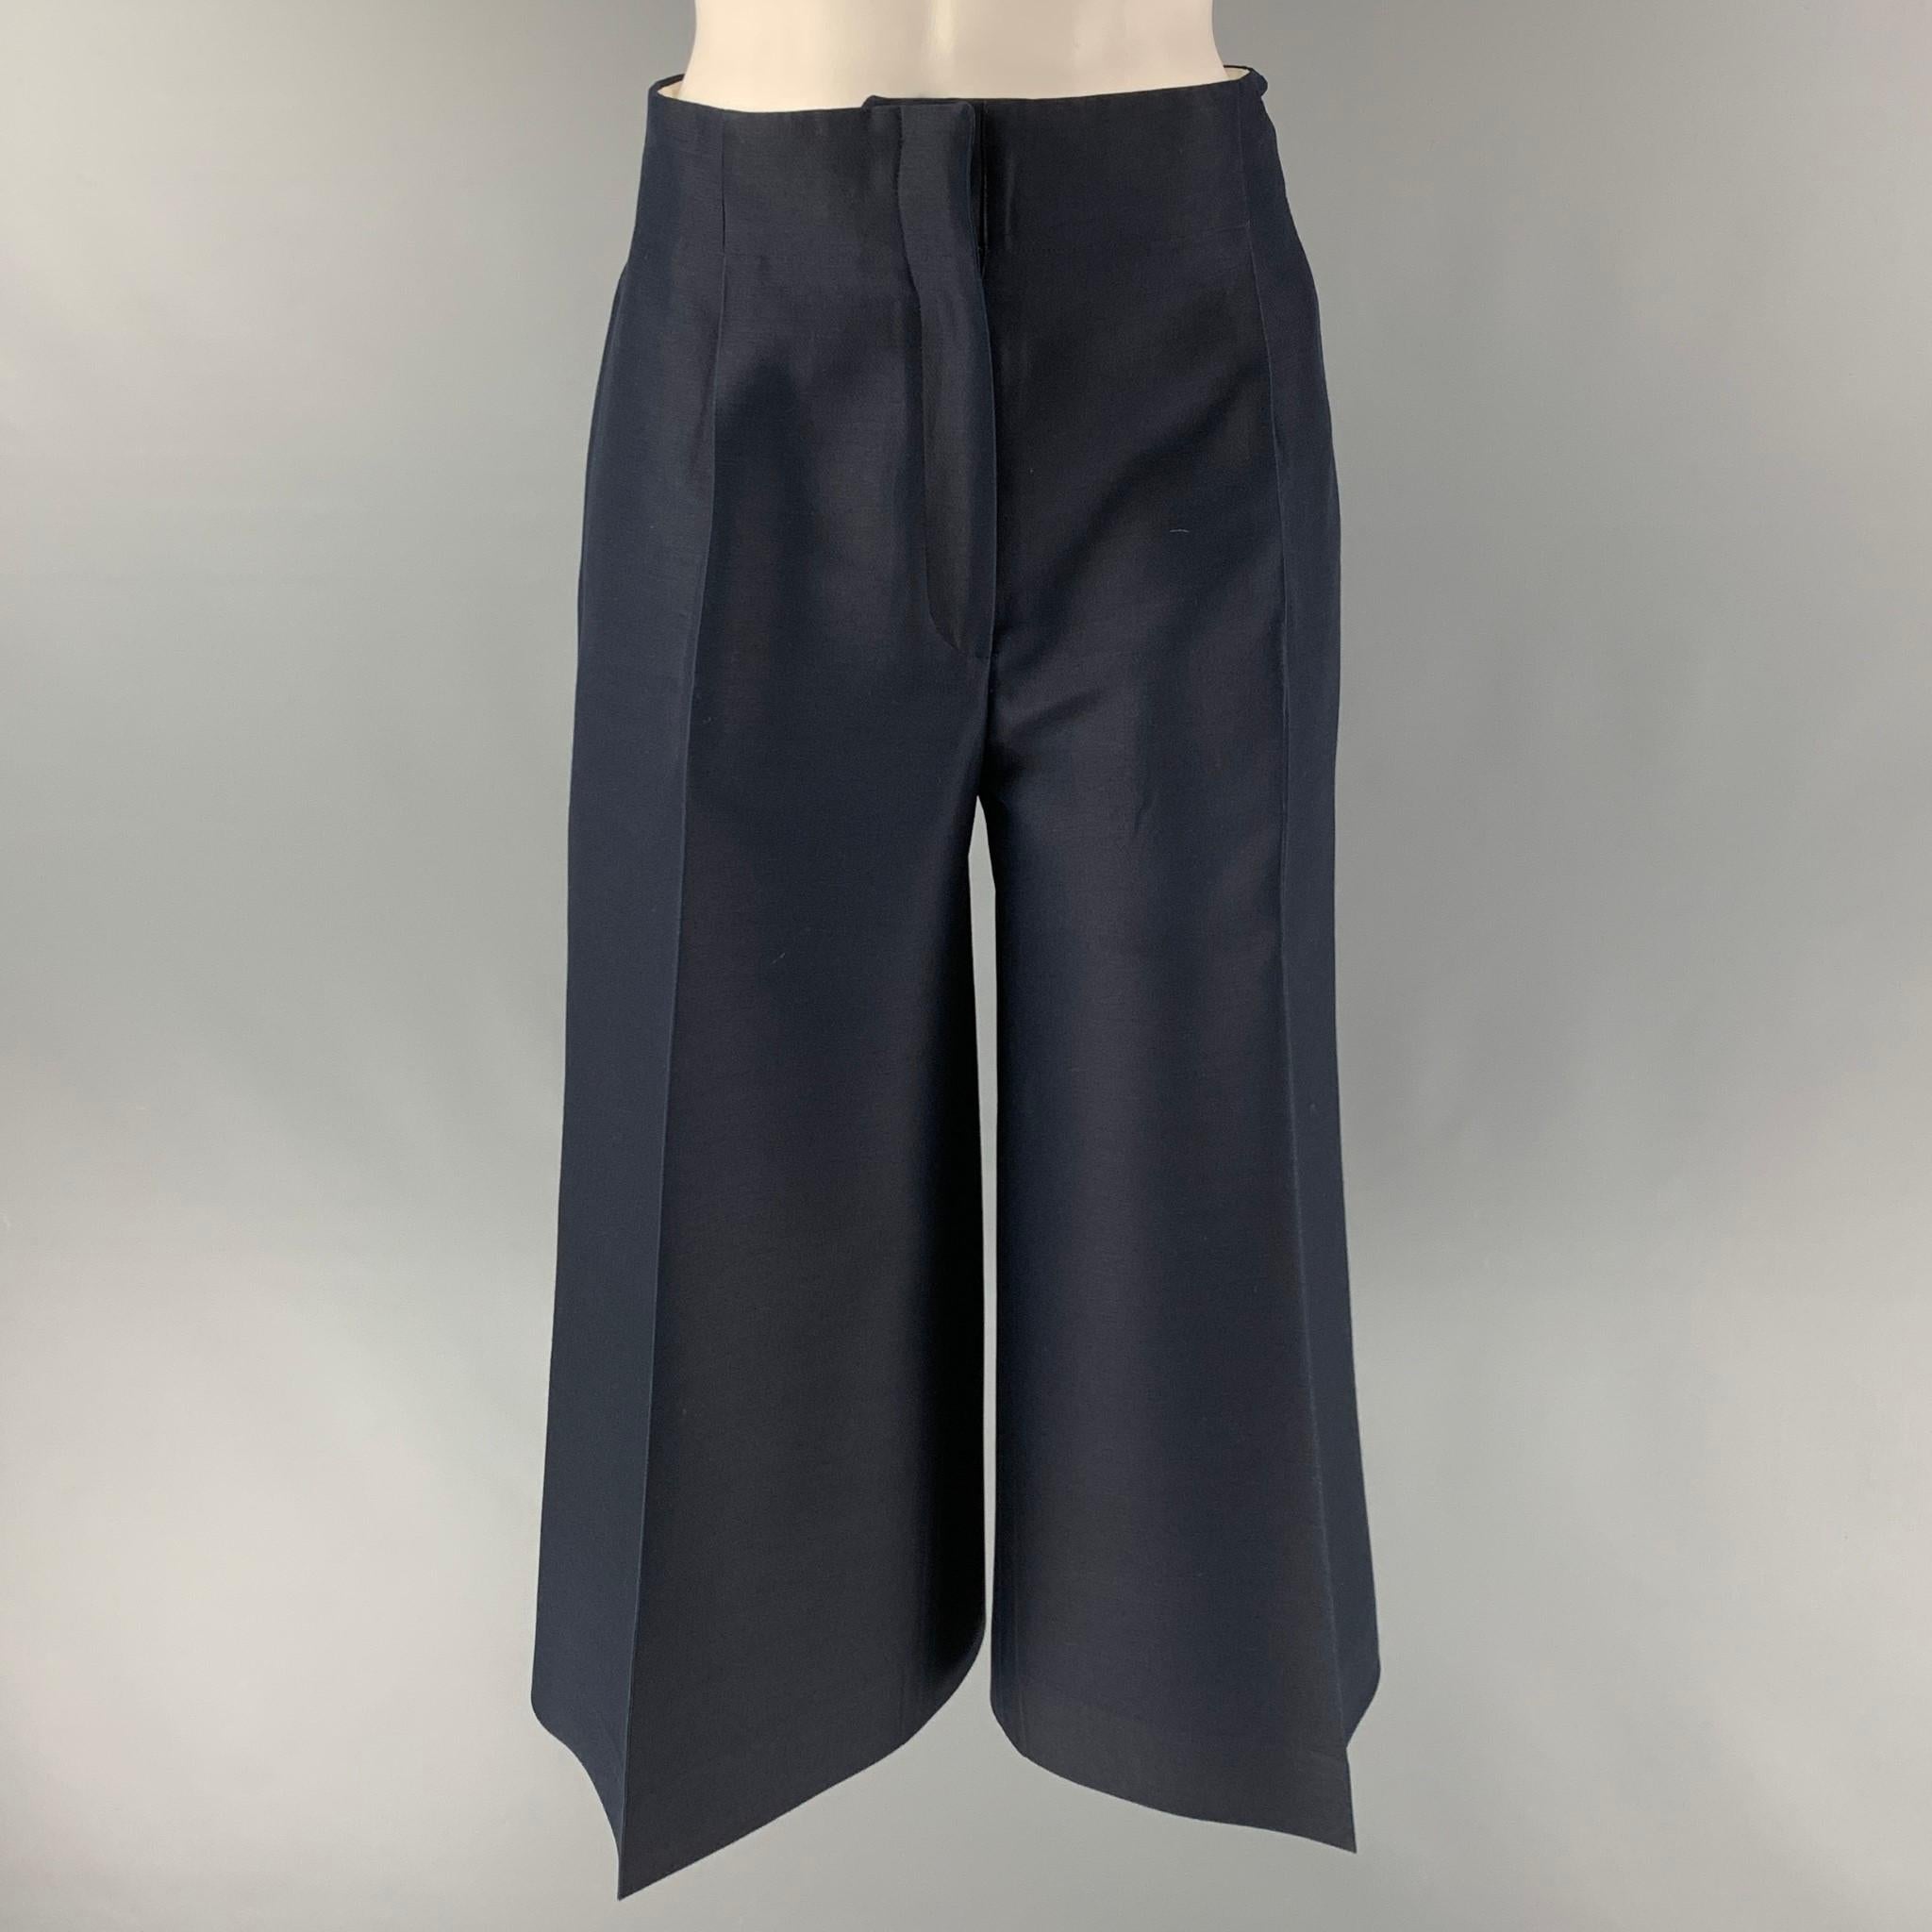 CELINE dress pants comes in a navy wool and silk material featuring a cropped style, wide leg, high waist, a front tab and a zip fly closure. Made in Italy.

Excellent Pre-Owned Condition.
Marked: 36

Measurements:

Waist: 29 in.
Rise: 14